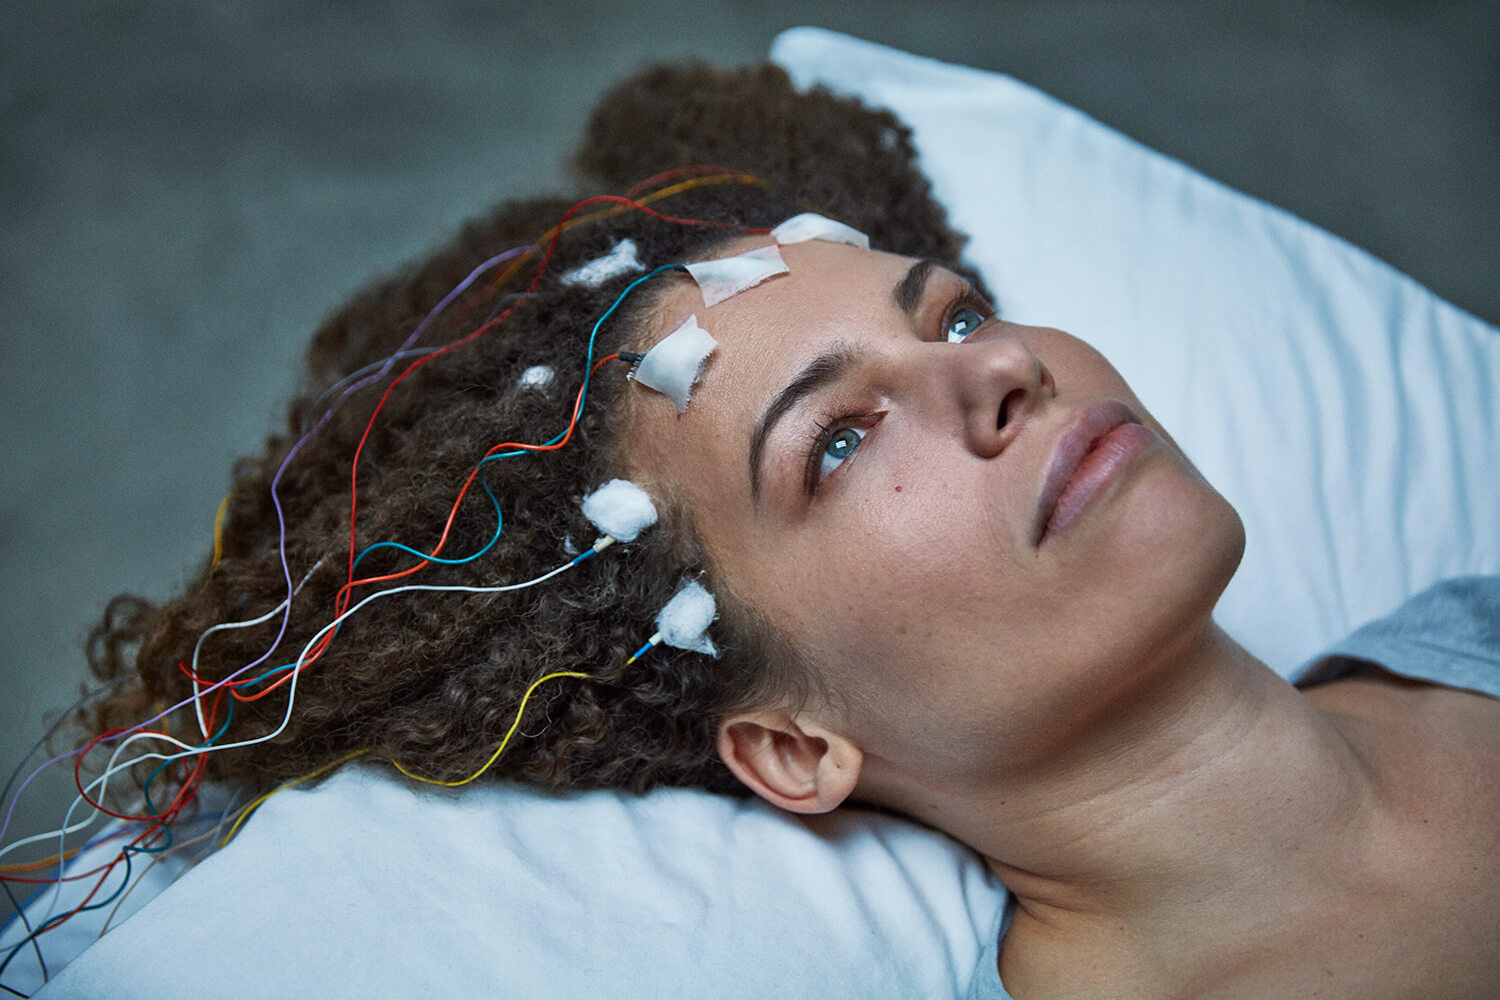 Still from Unrest. A woman's head is lying on a pillow with sensors taped to her forehead, the wires laying on her hair.